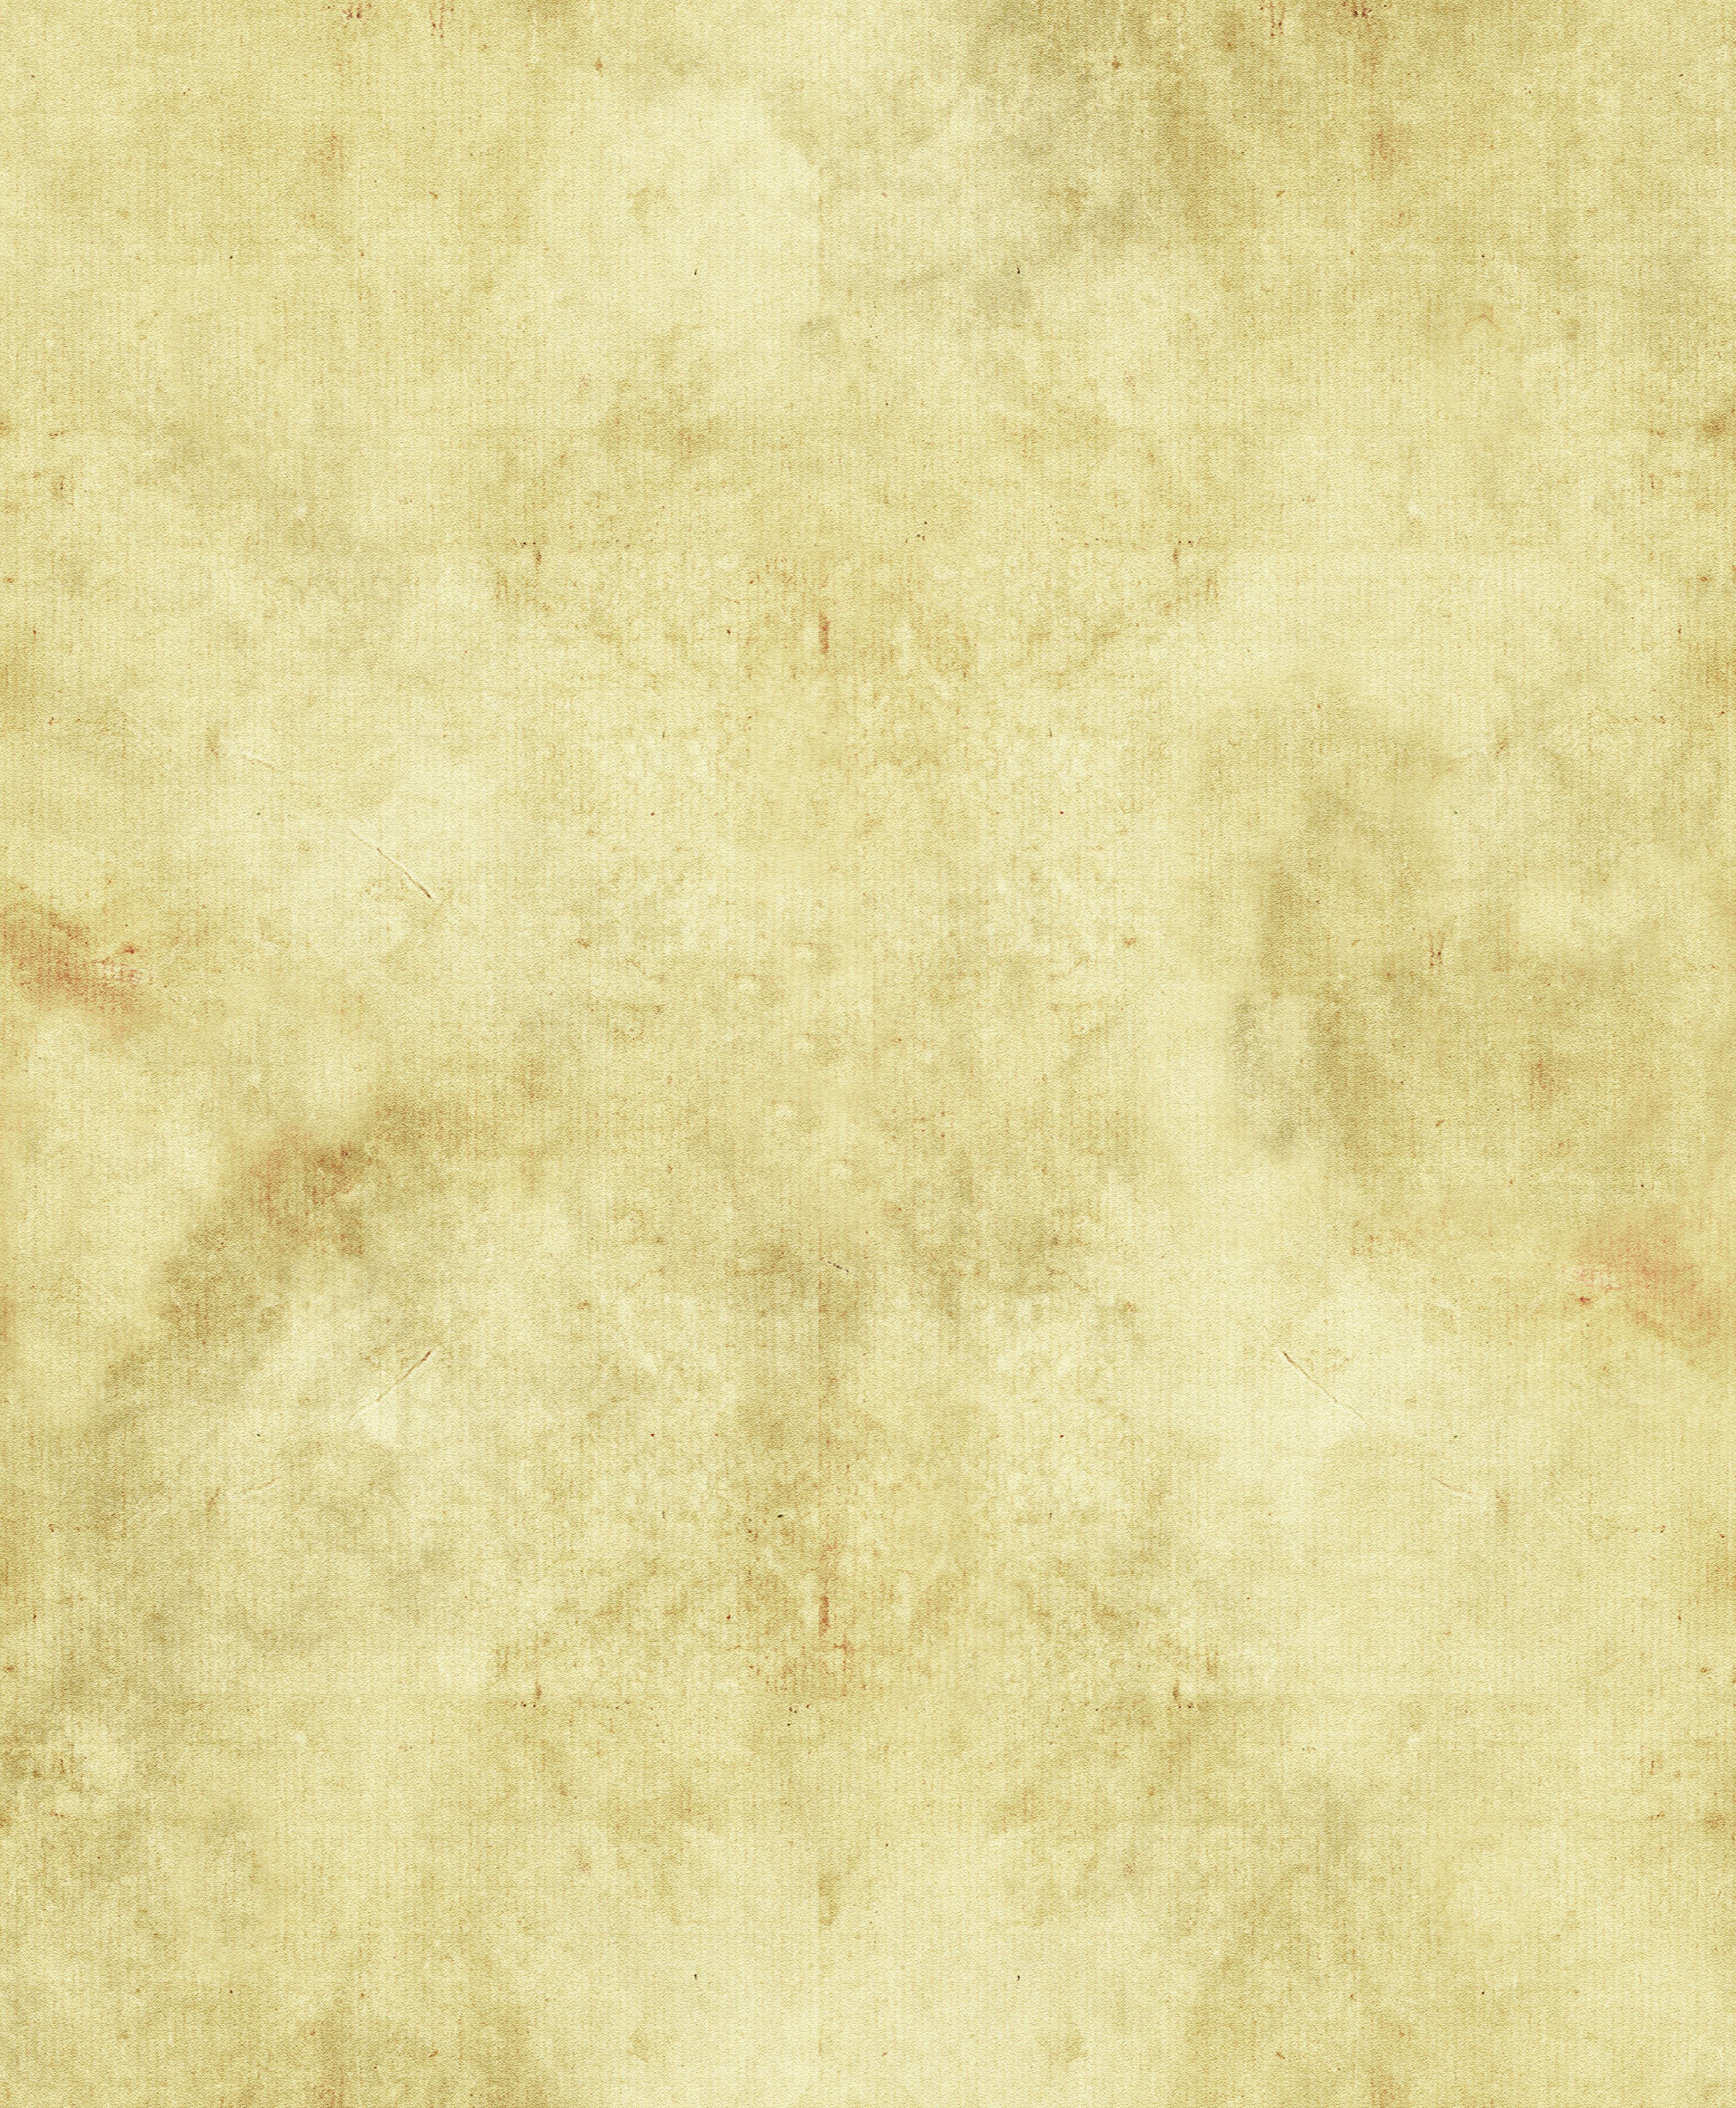 https://www.myfreetextures.com/wp-content/uploads/2011/06/an-old-and-worn-parchment-paper.jpg